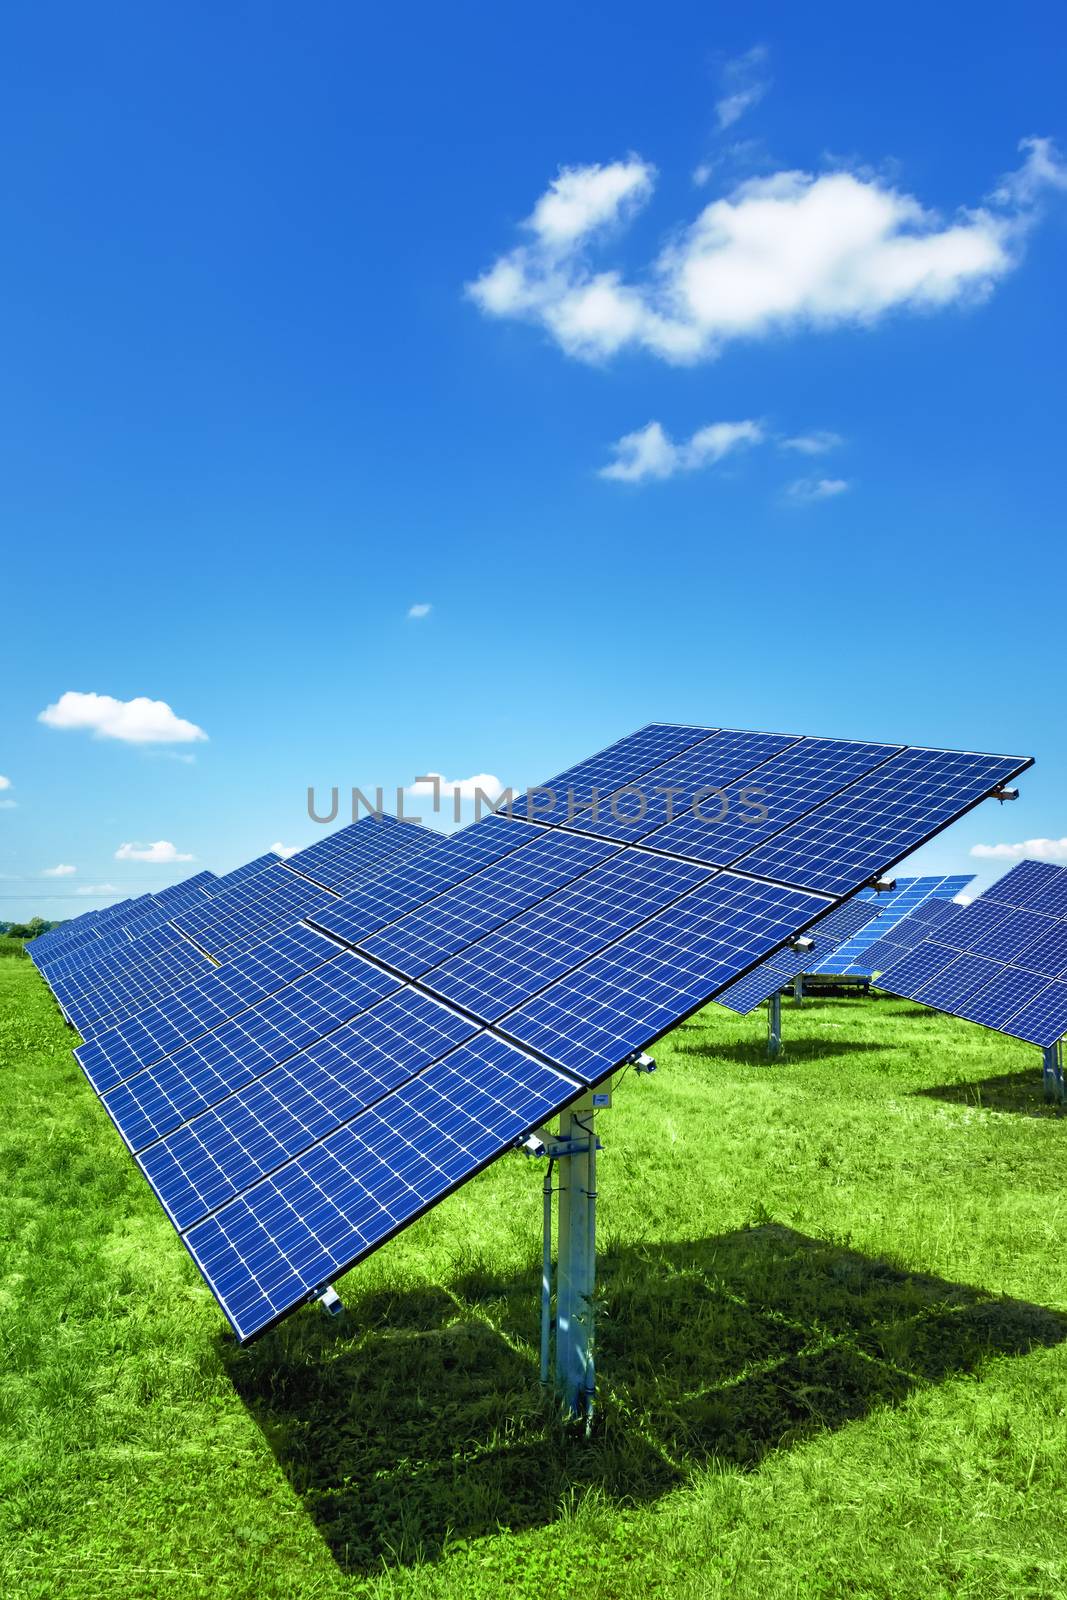 An image of a typical solar plant outdoors